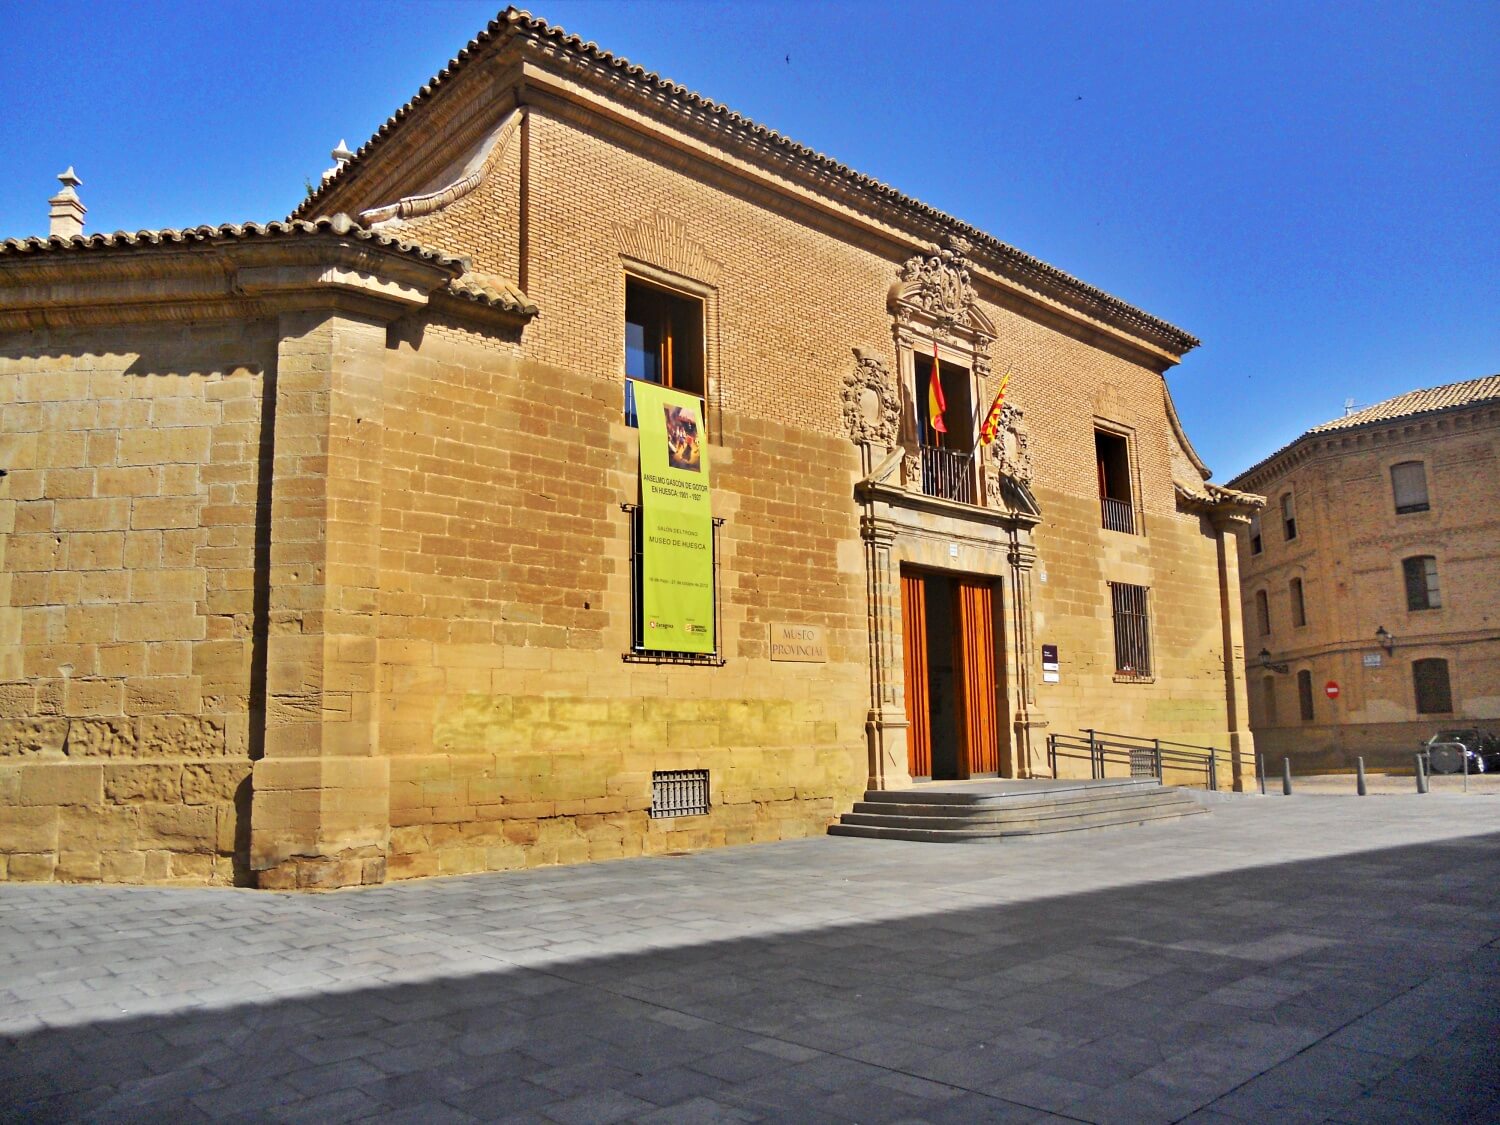 THE MUSEUM OF HUESCA